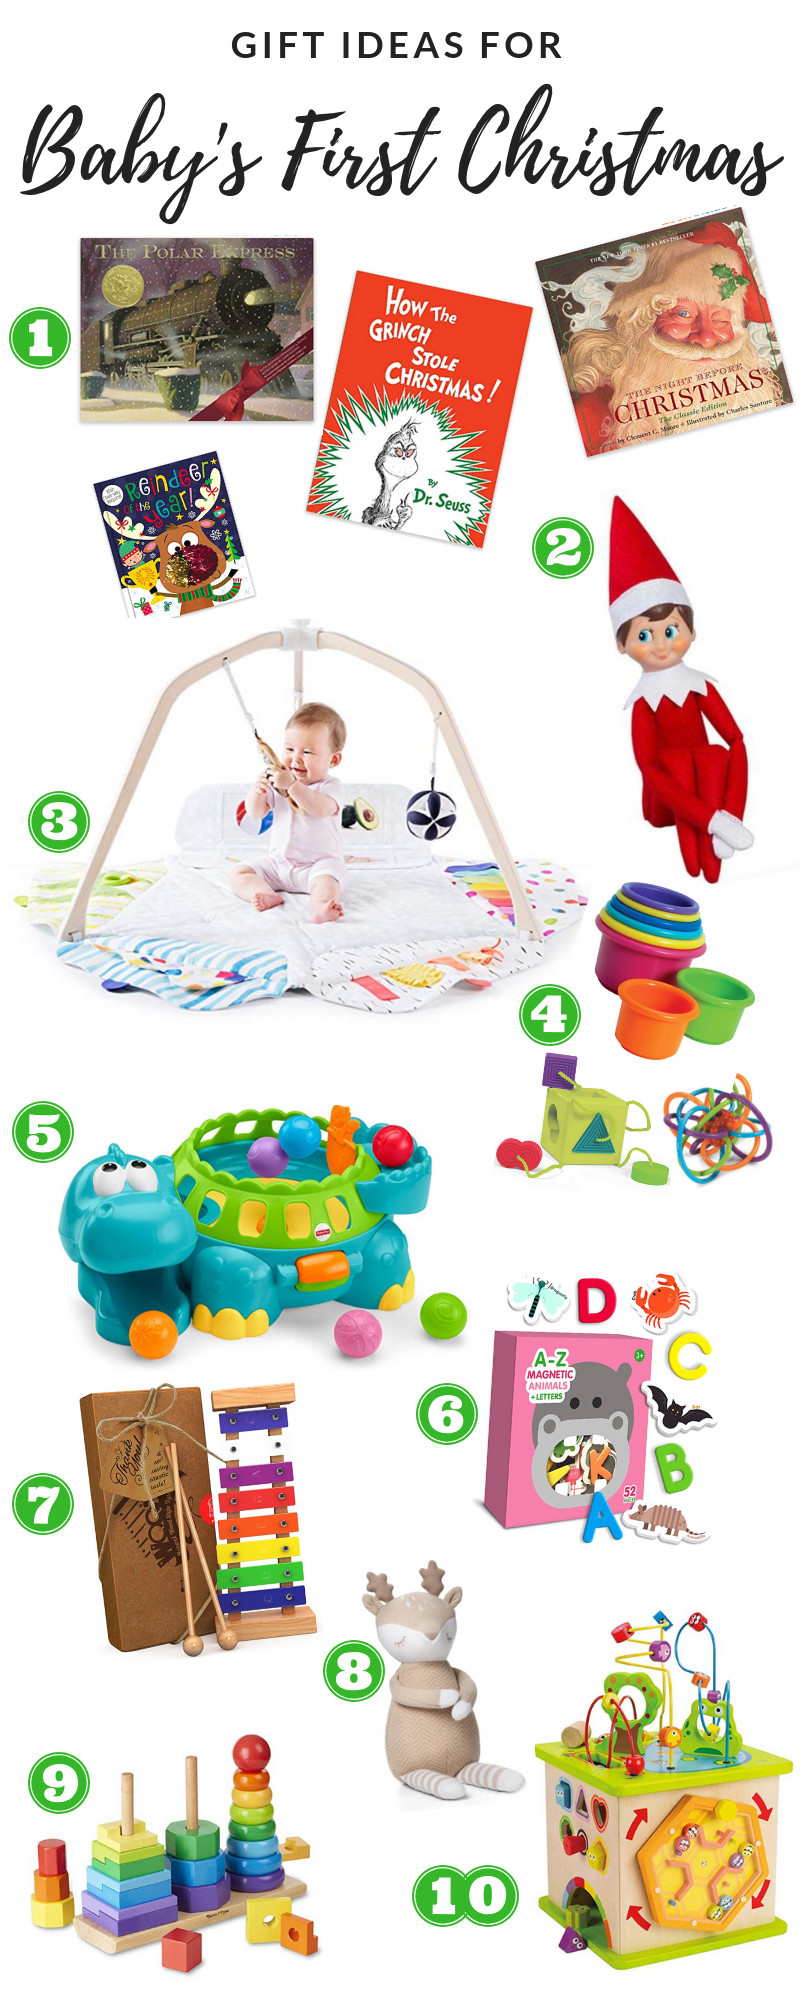 Christmas Gift Ideas From Baby
 Gift Ideas For Baby s First Christmas Dana Traynor